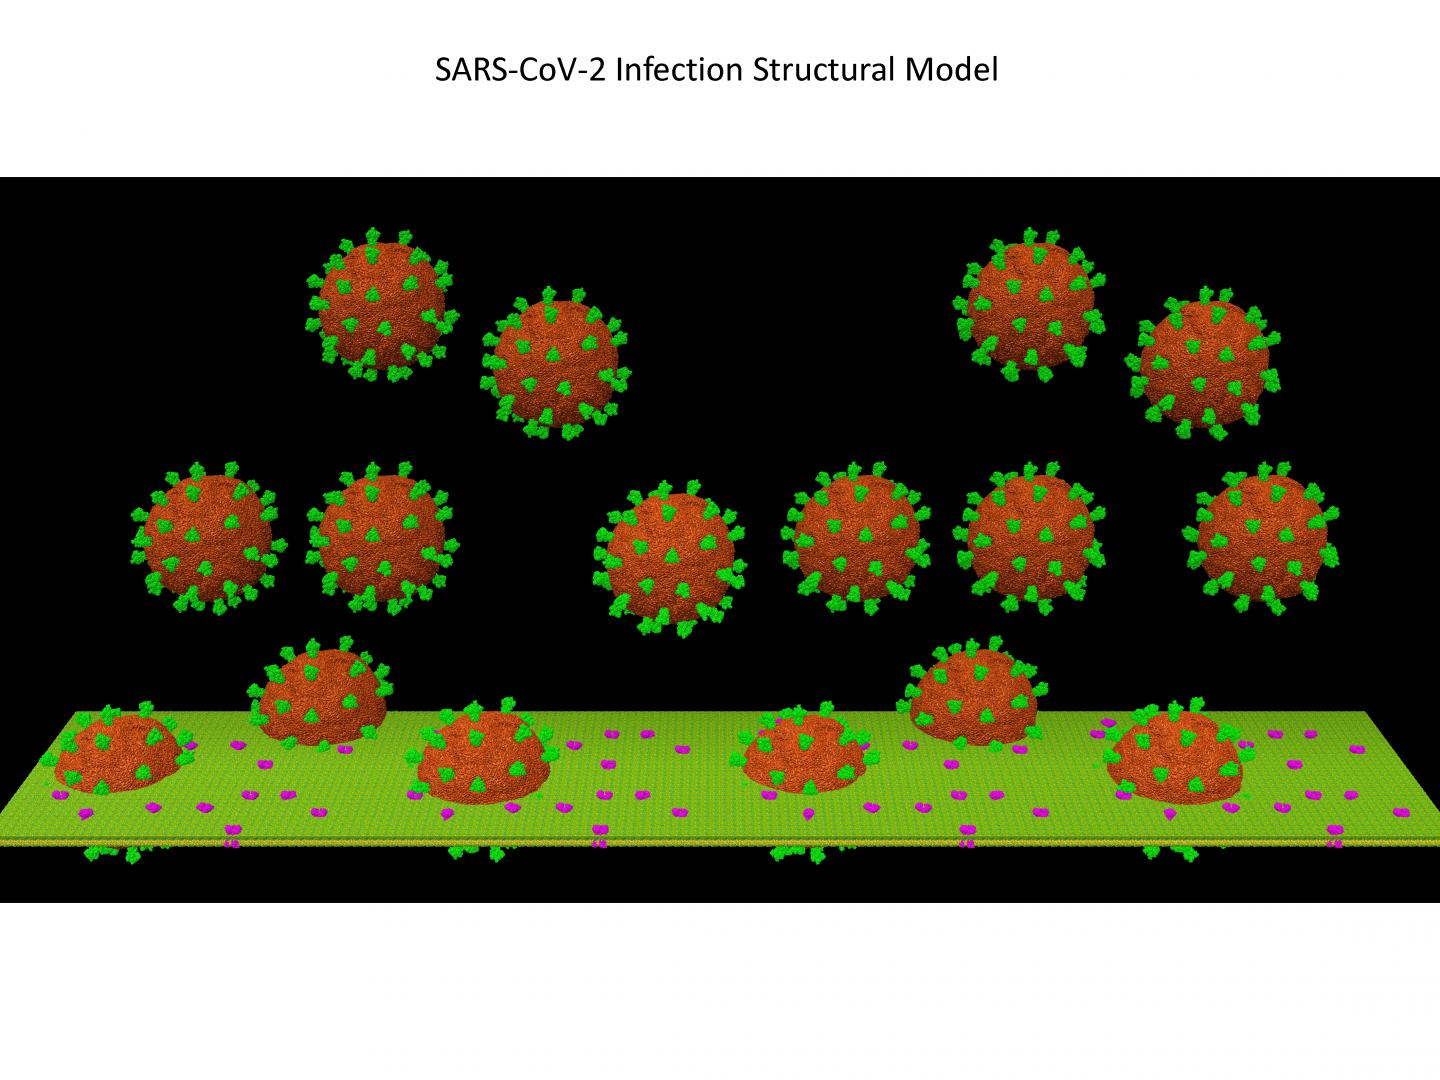 Structural model of SARS-CoV-2 infection. This structural model was built with UCSF Chimera using high-performance computers (Bridges Large and Frontera). The model shows 16 viruses, with the spike proteins shown in green (PDB ID: 6VSB) and an actual lipid bilayer membrane, with ACE2 dimers shown in magenta. All these structures are at atomic resolution. The length of the membrane is approximately 1 micrometer.  CREDIT Victor Padilla-Sanchez, The Catholic University of America